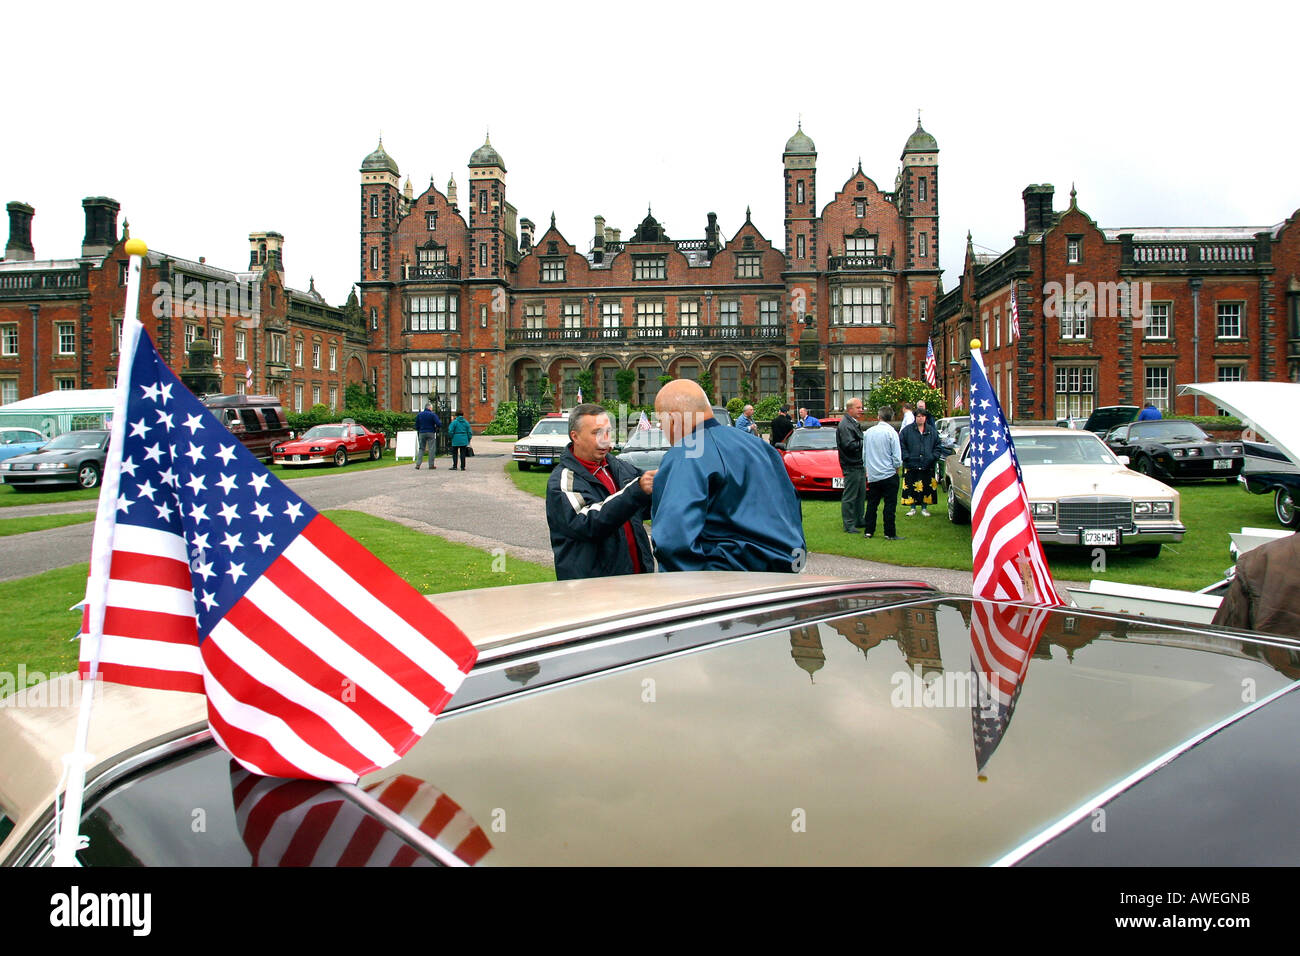 England Cheshire Macclesfield Capesthorne Hall Car Rally Stock Photo